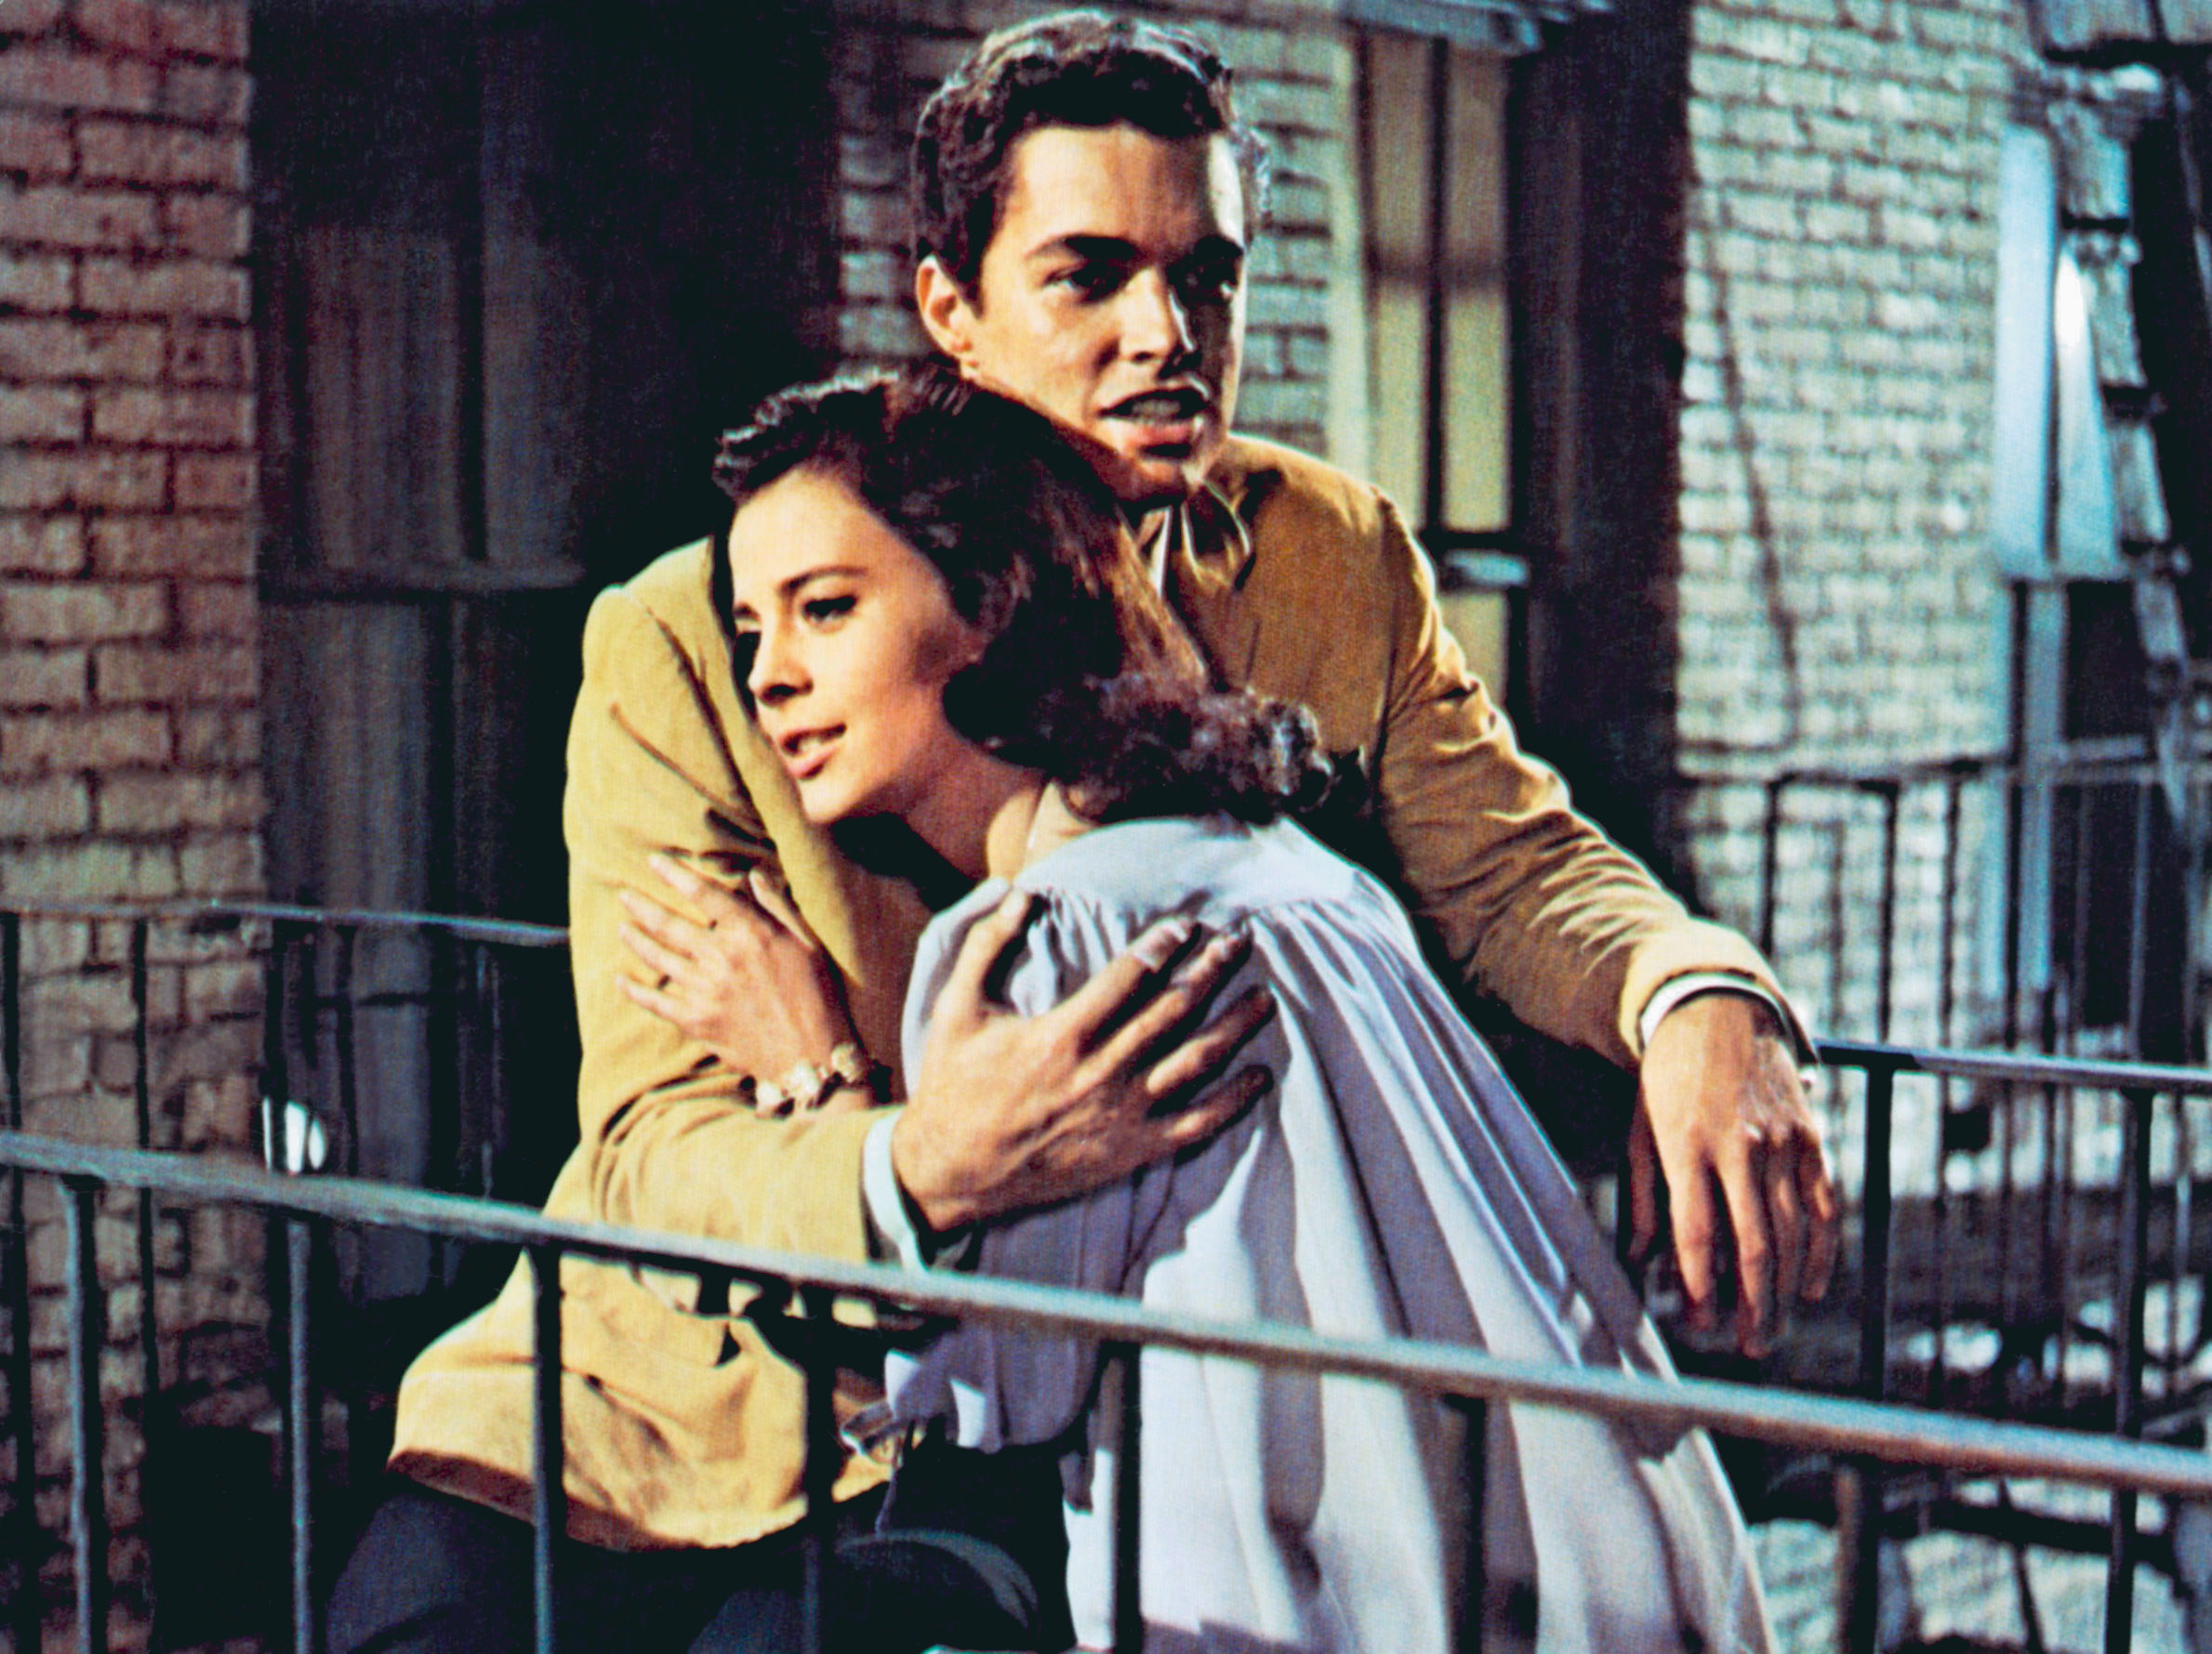 Richard and Natalie in the iconic fire escape scene from West Side Story